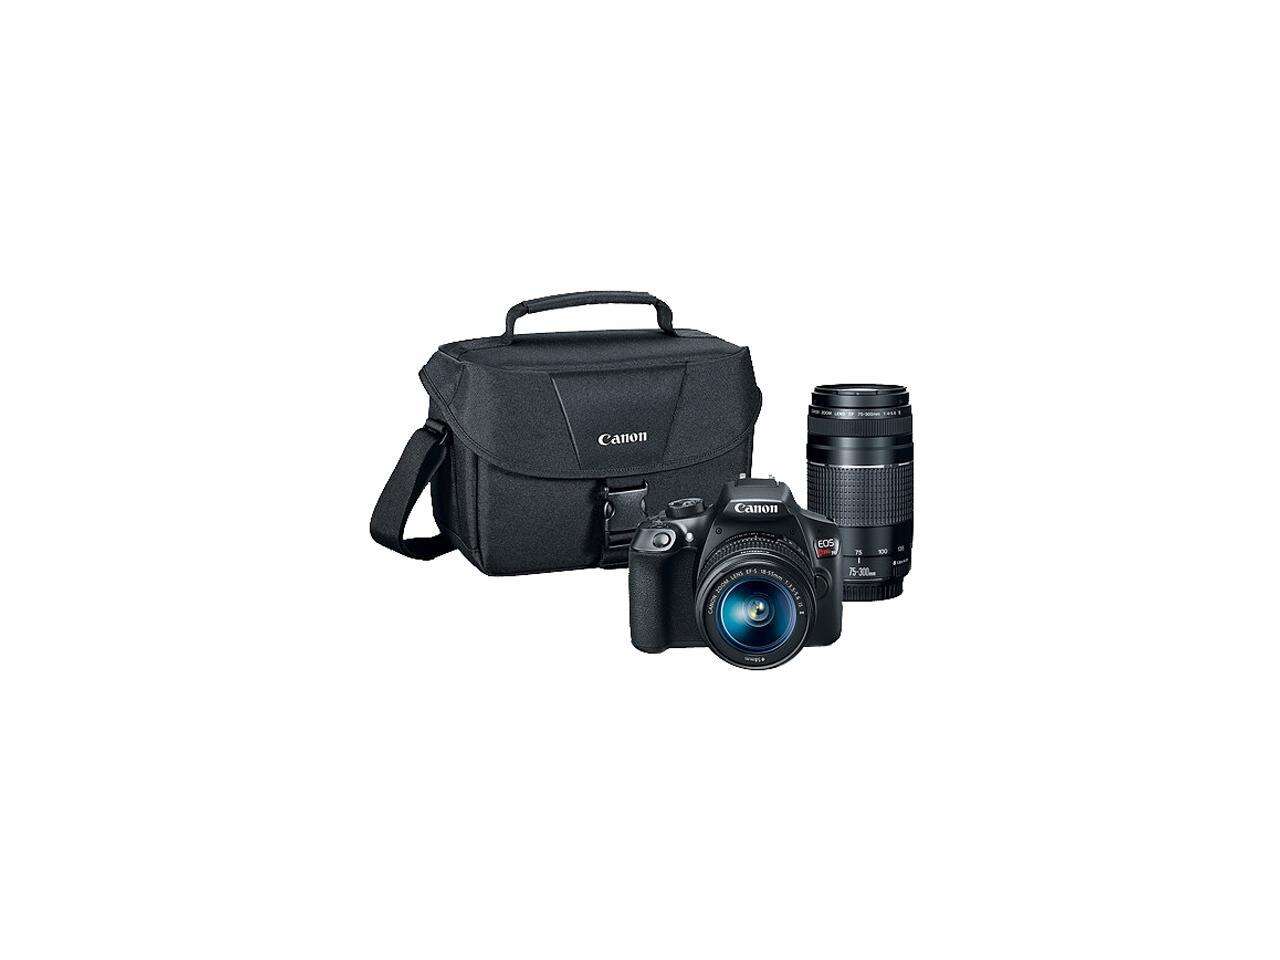 Canon EOS Rebel T6 DSLR Camera with 18 - 55 mm and 75 - 300 mm Lenses Kit